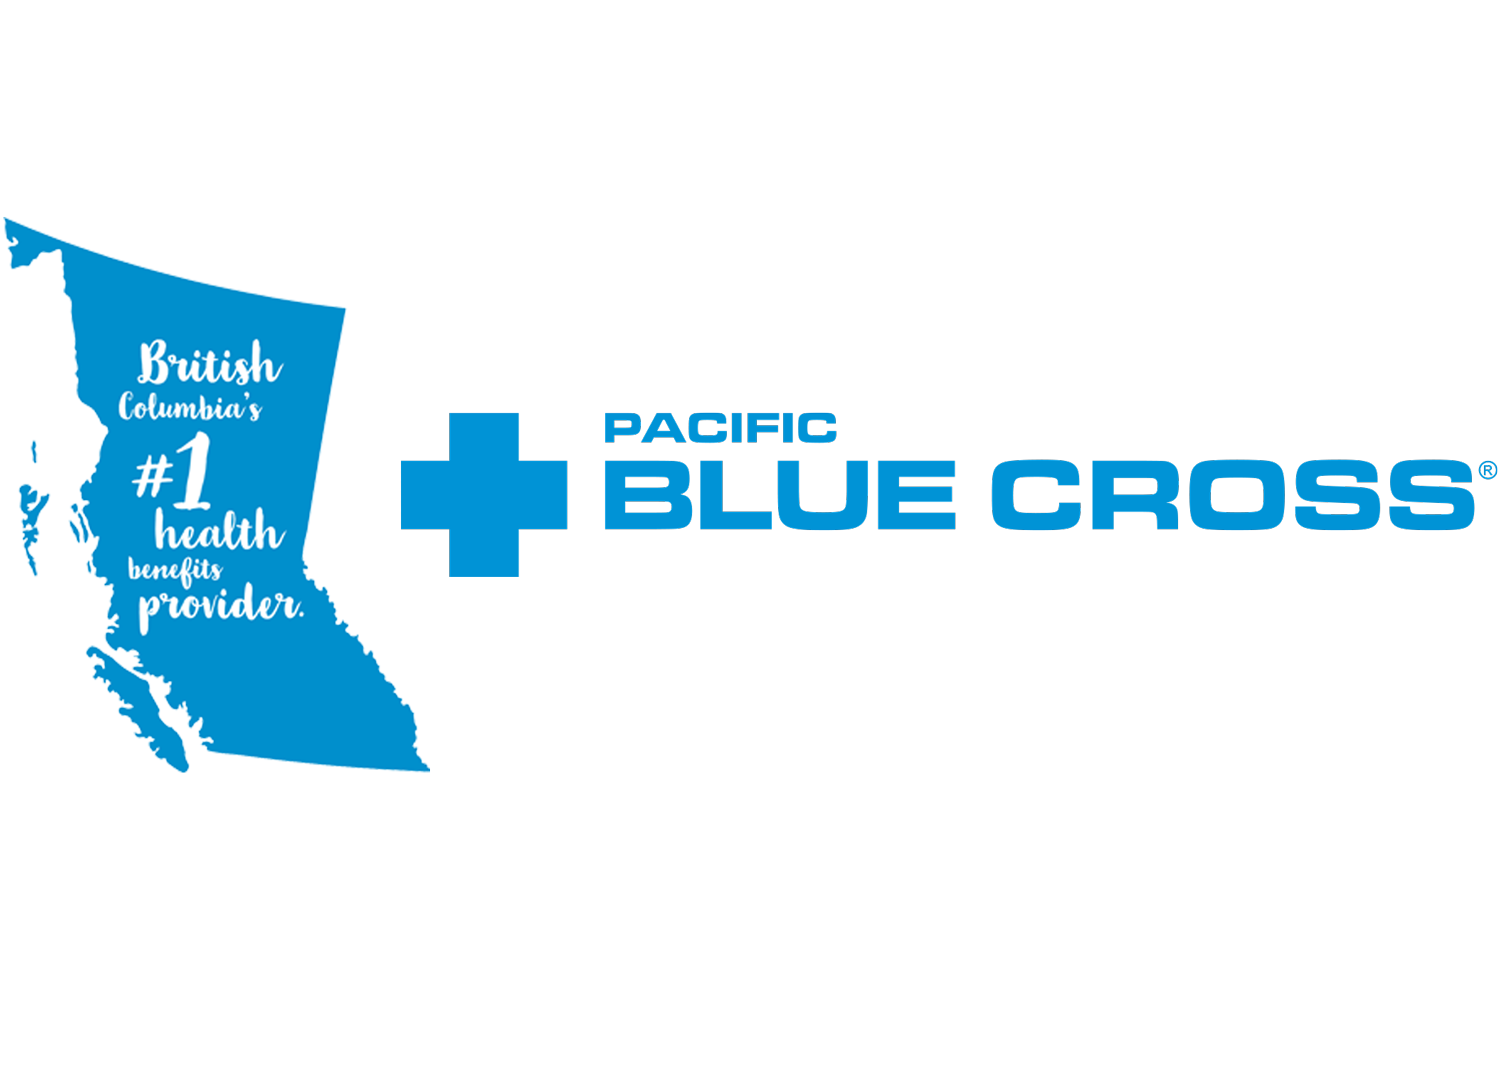 Pacific Blue Cross - BC's #1 provider of health, dental and travel